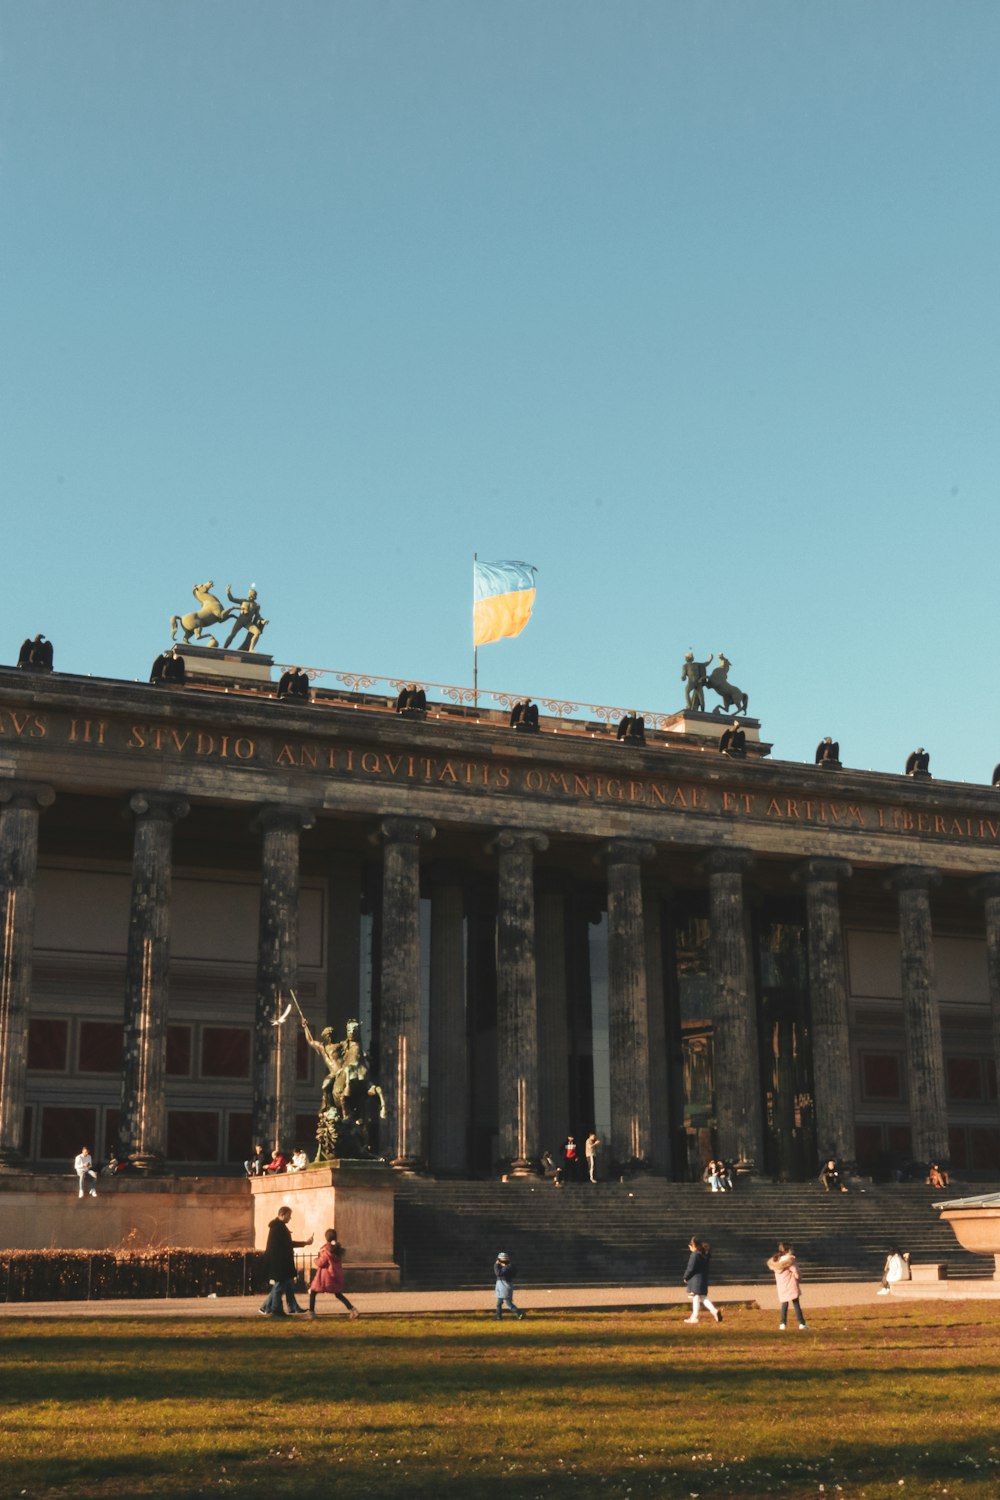 a large building with columns and a flag on top